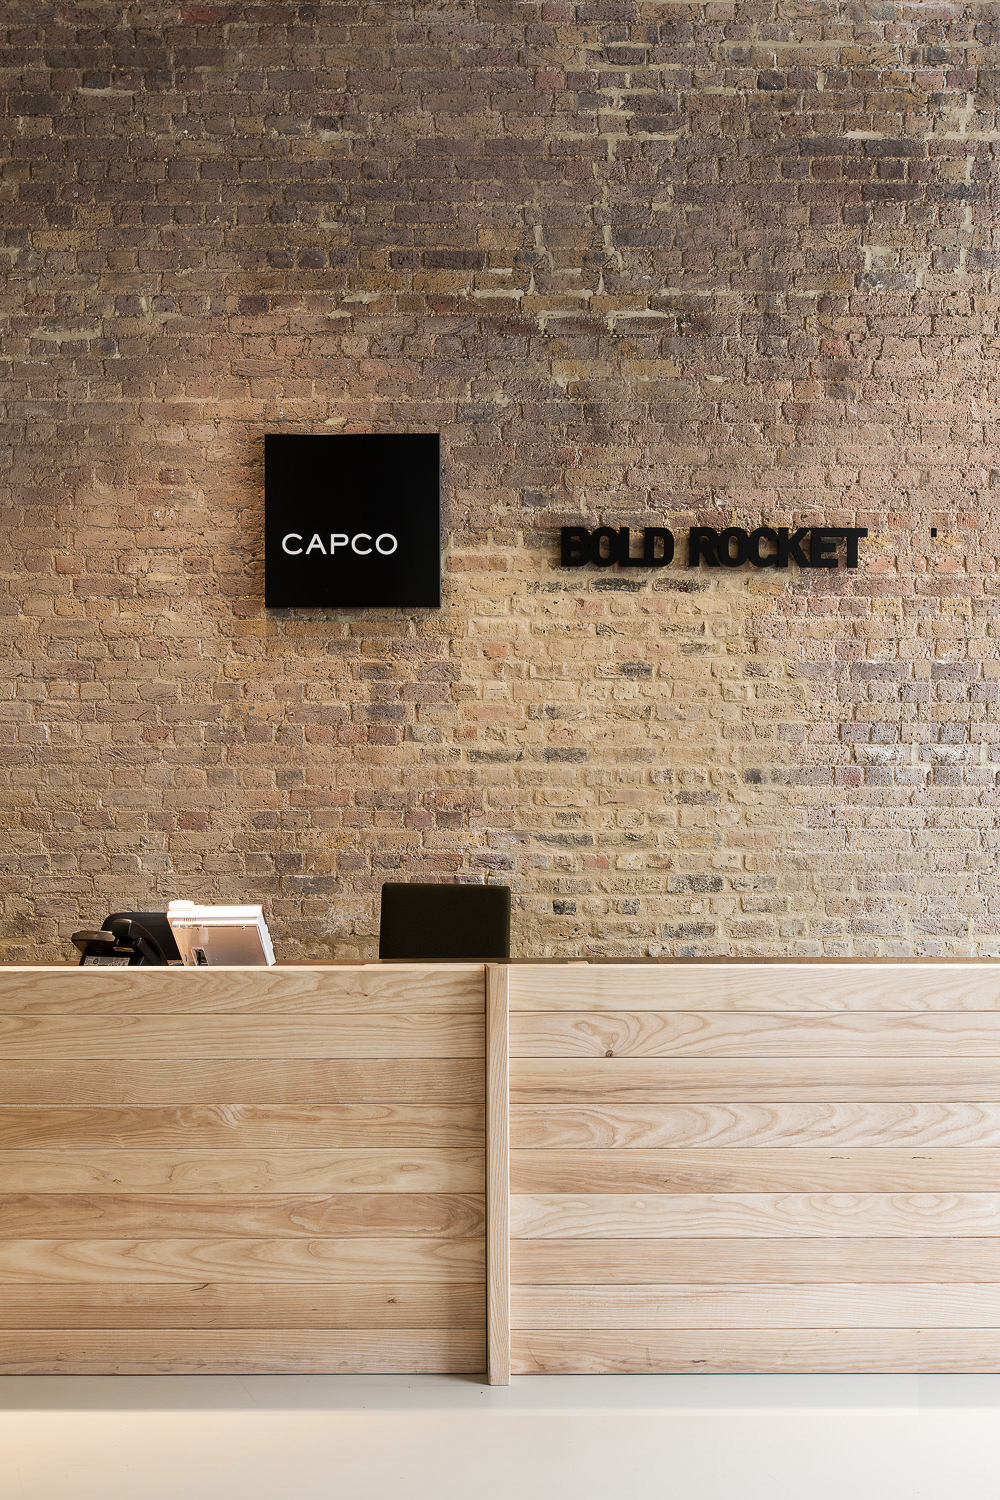 ddsao_D_DS_Architecture Office_Commercial_Capco Bold Rocket_London_001